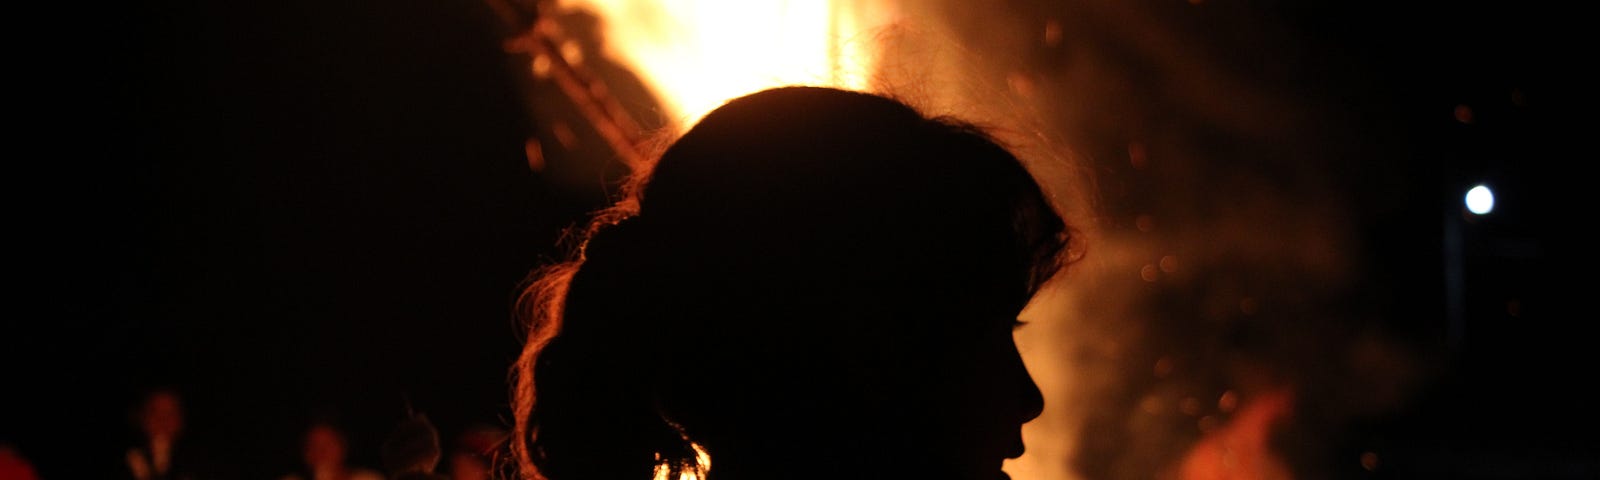 The silhouette of a woman sits against a roaring fire at night.